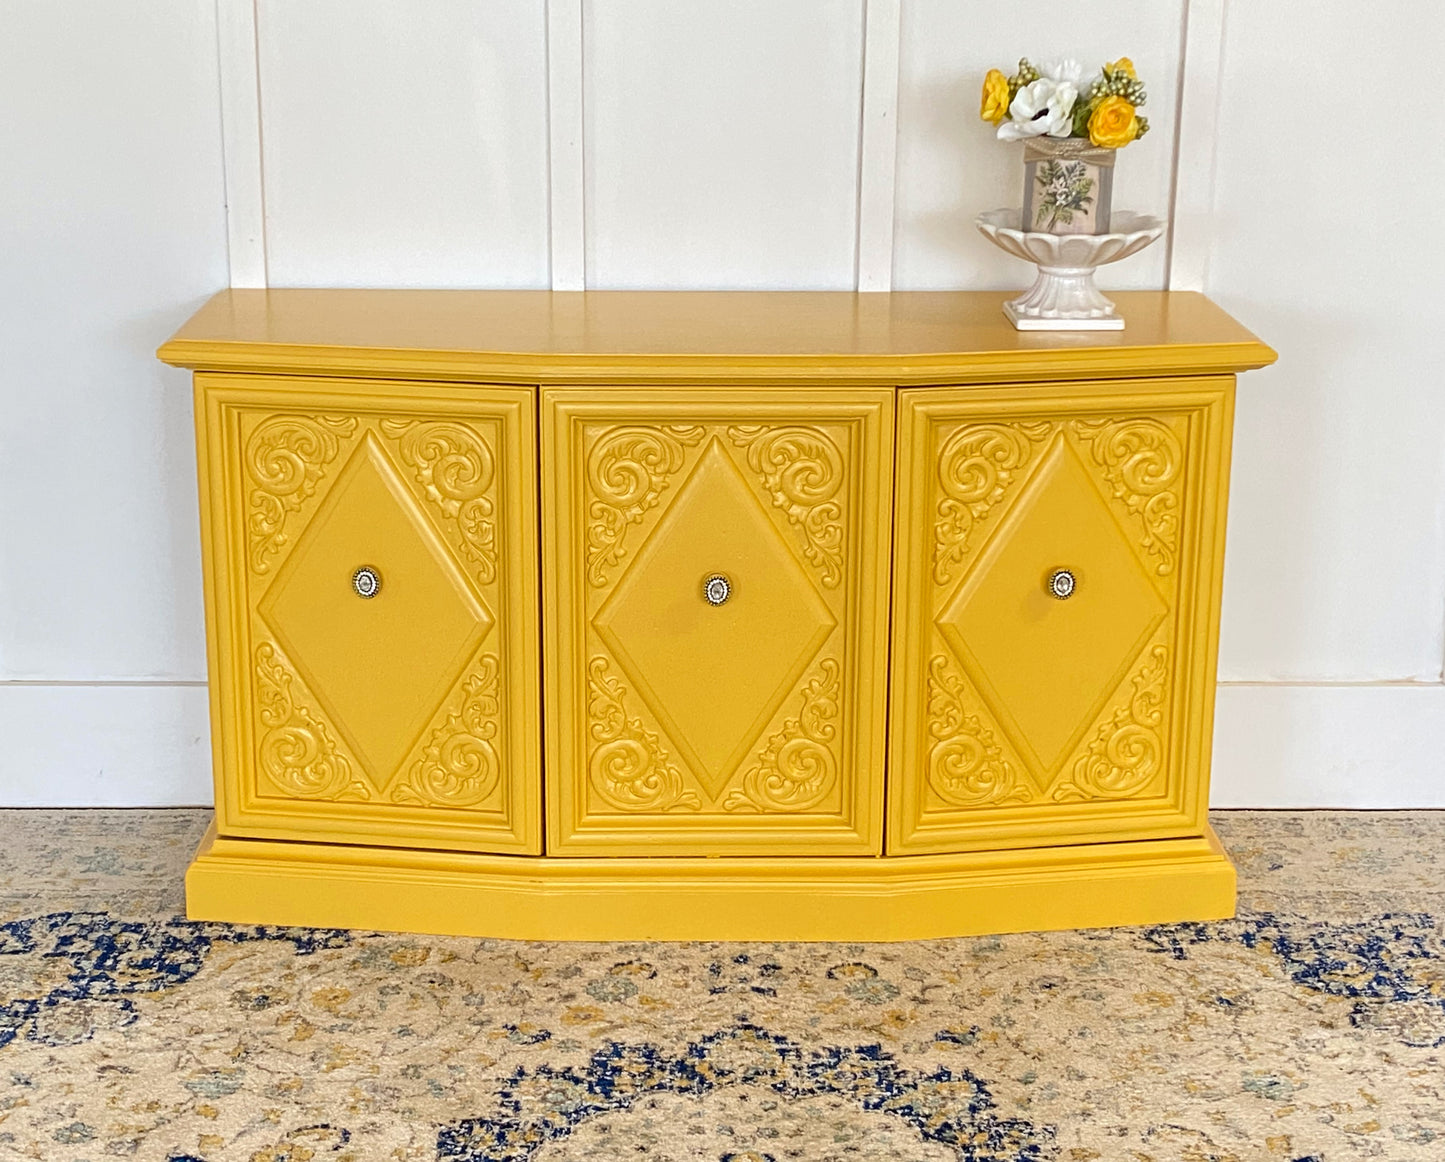 Marigold Furniture and Cabinet Paint